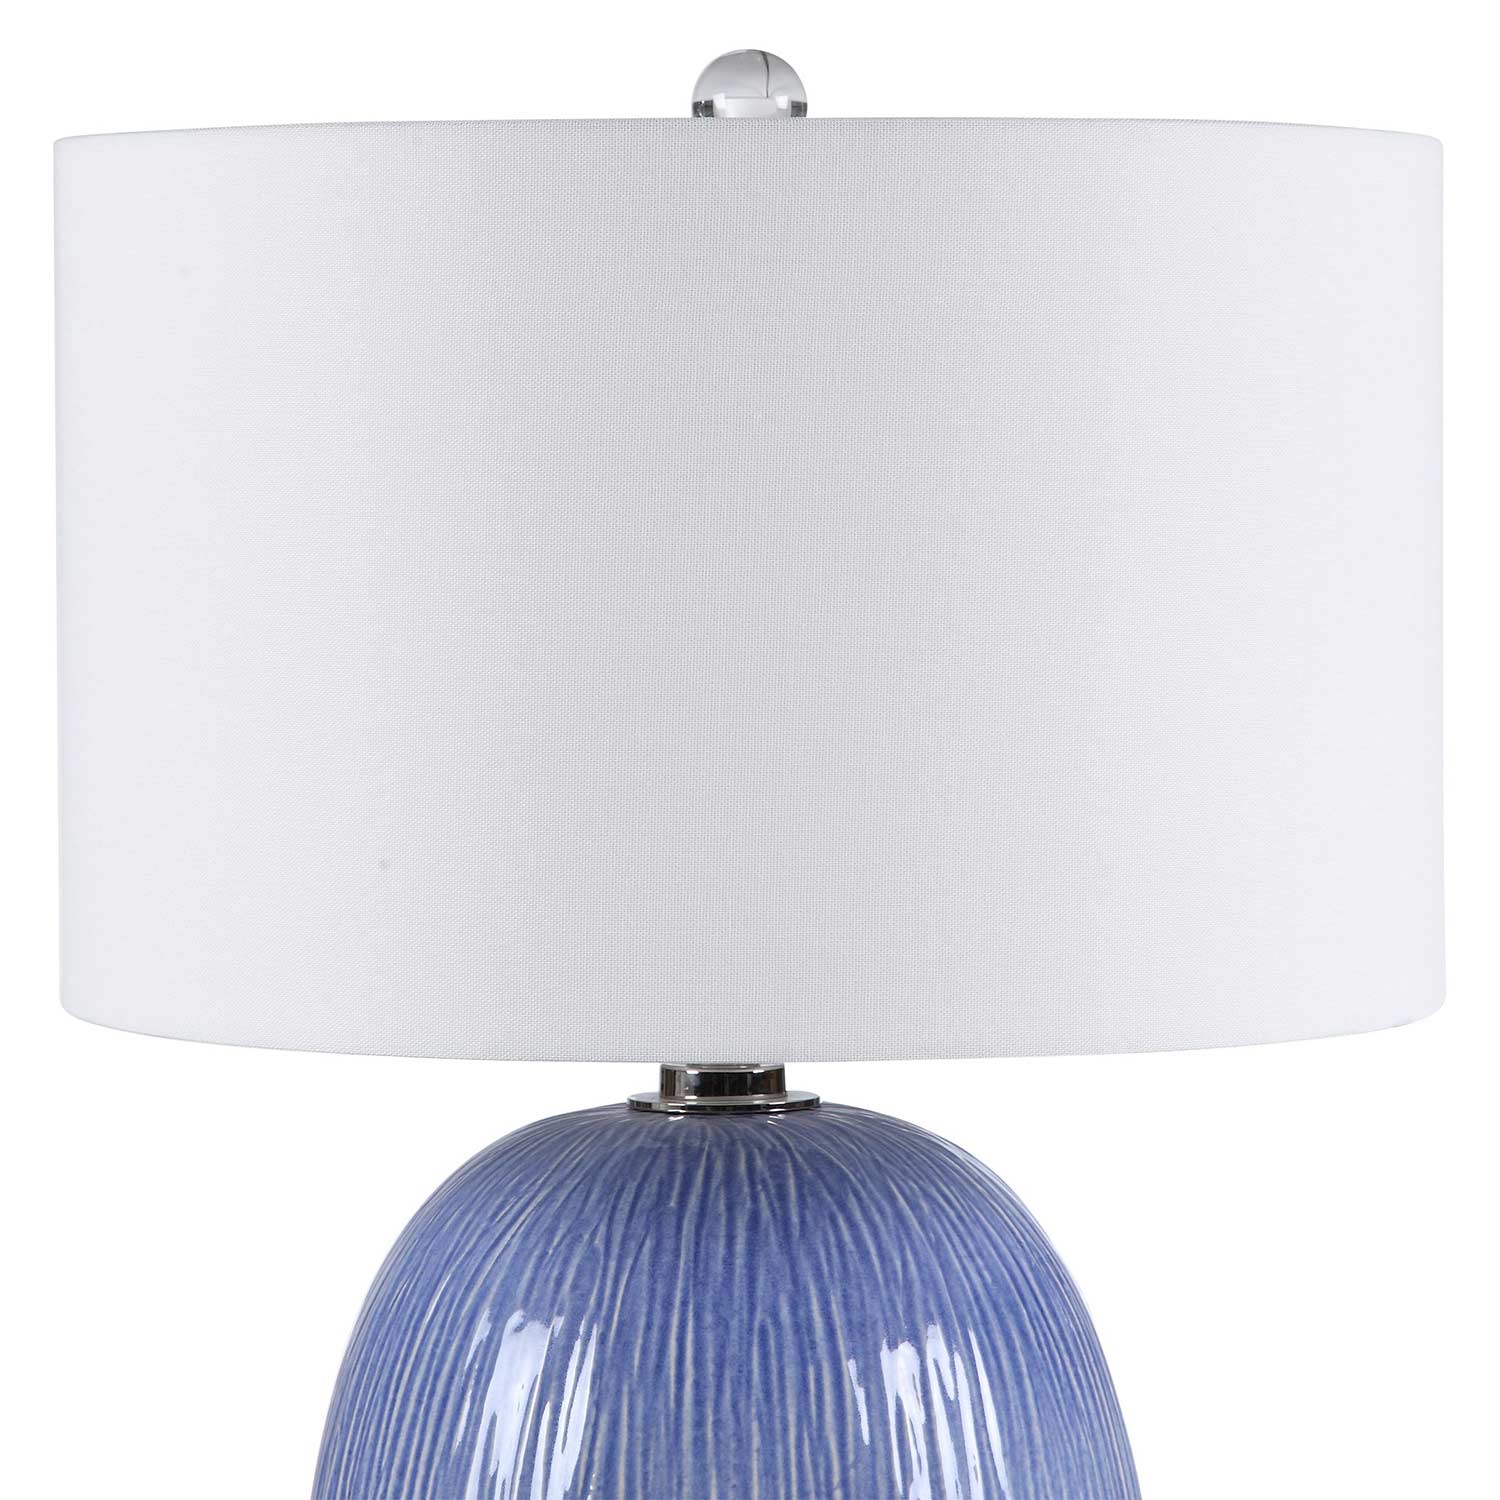 Uttermost Westerly Table Lamp - Blue